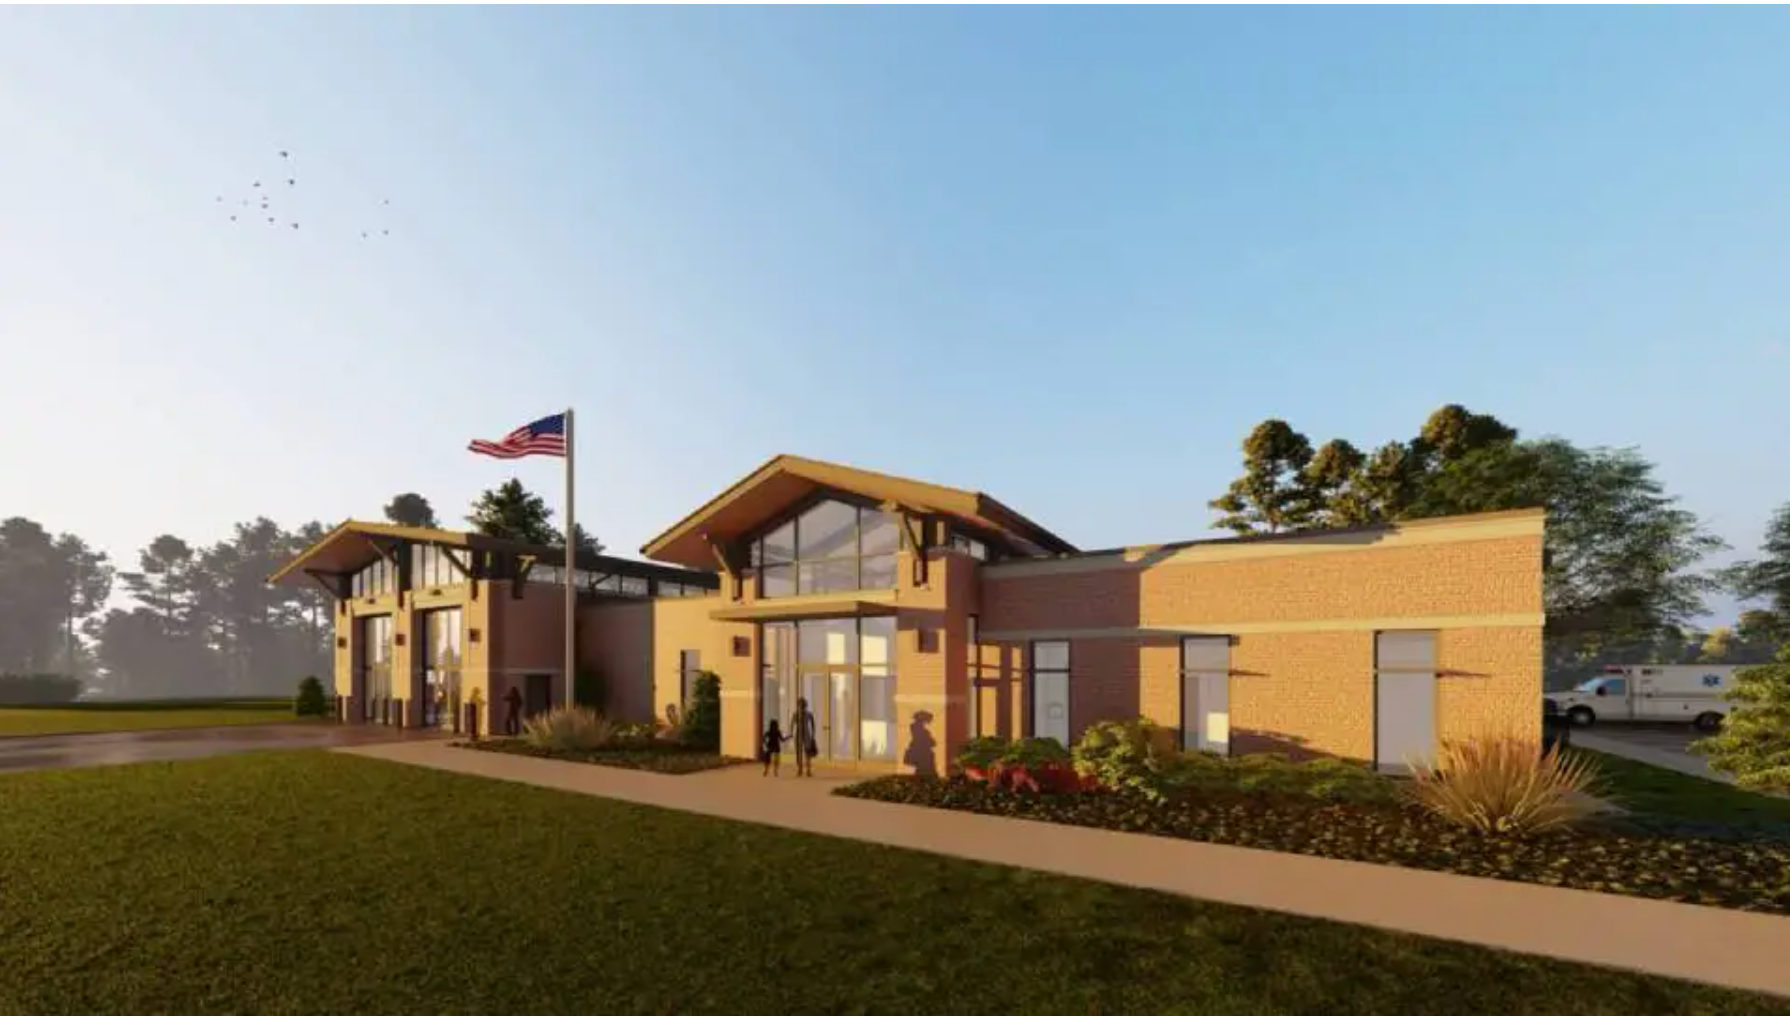 fire station rendering